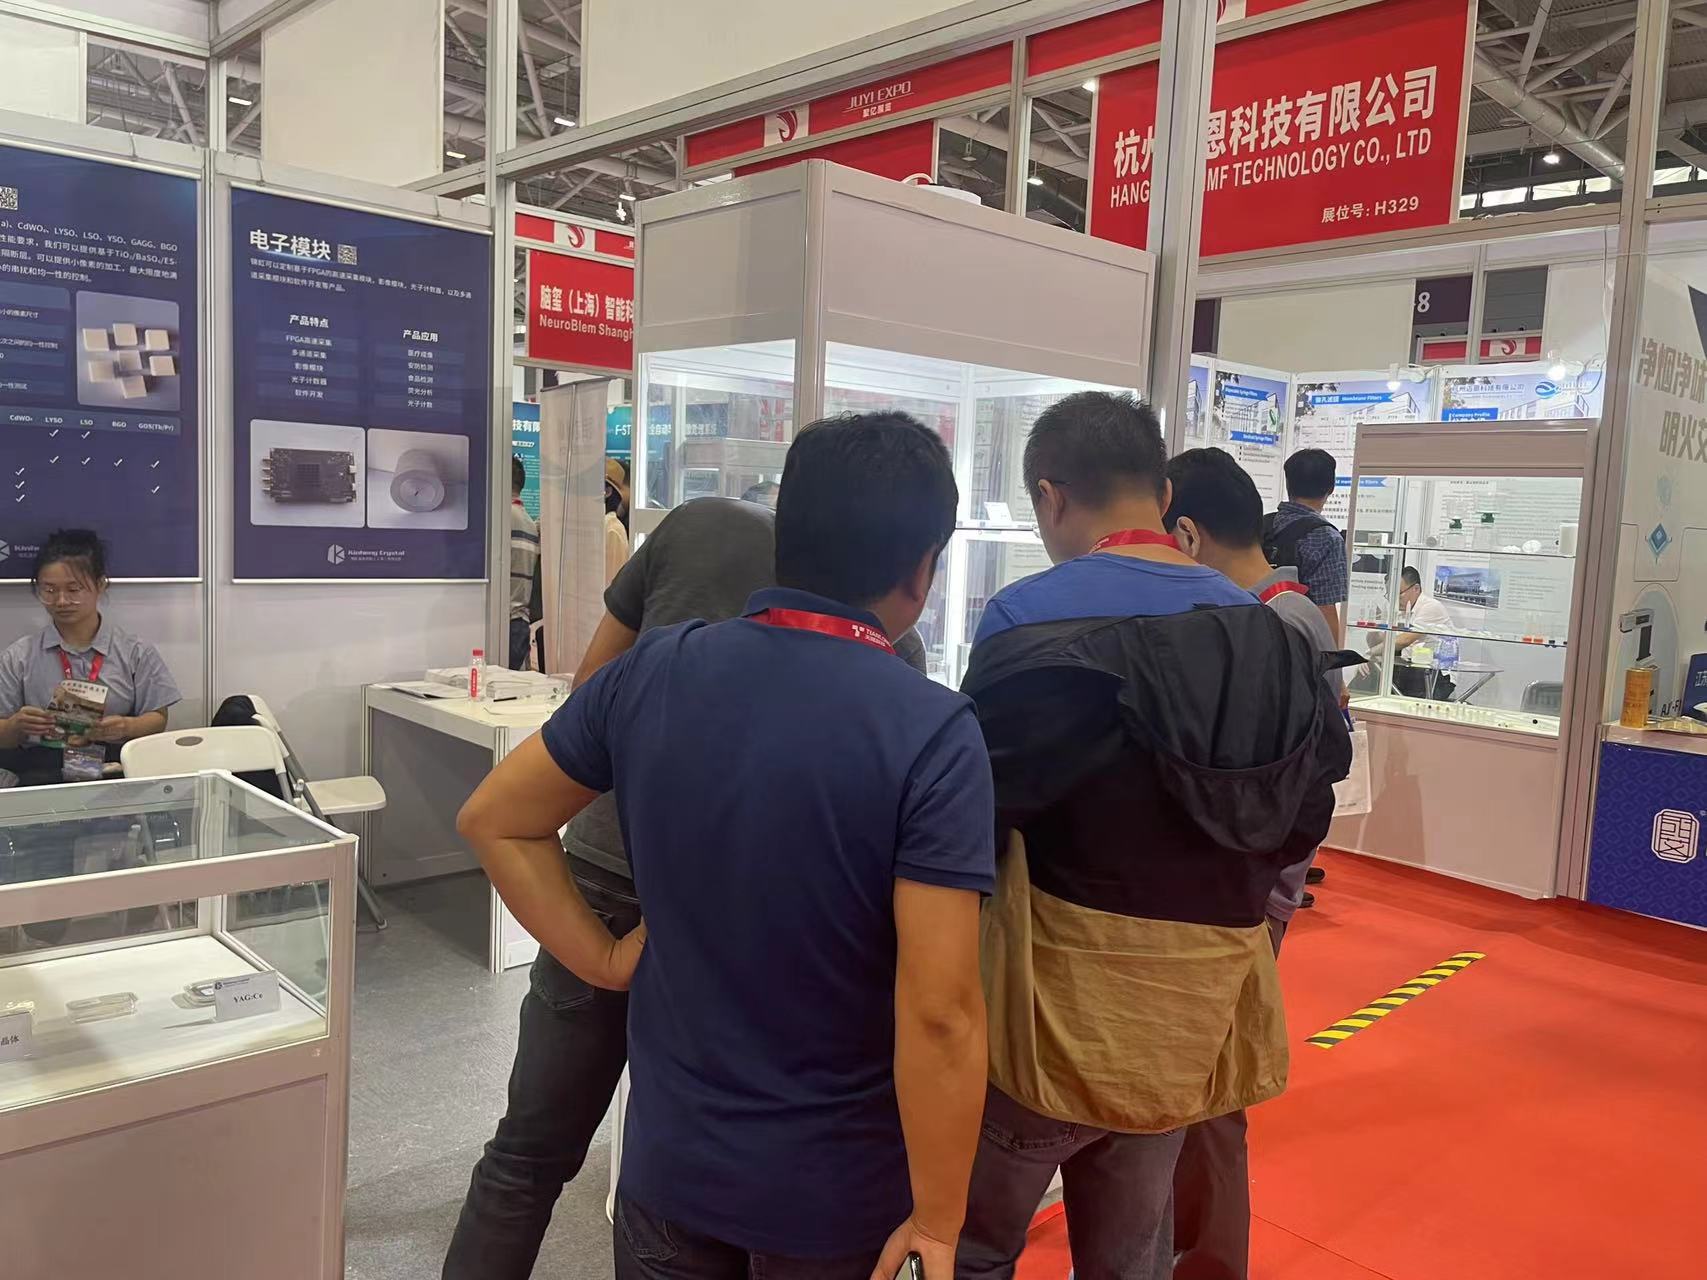 kinheng crystal in China International Medical Devices Exhibition